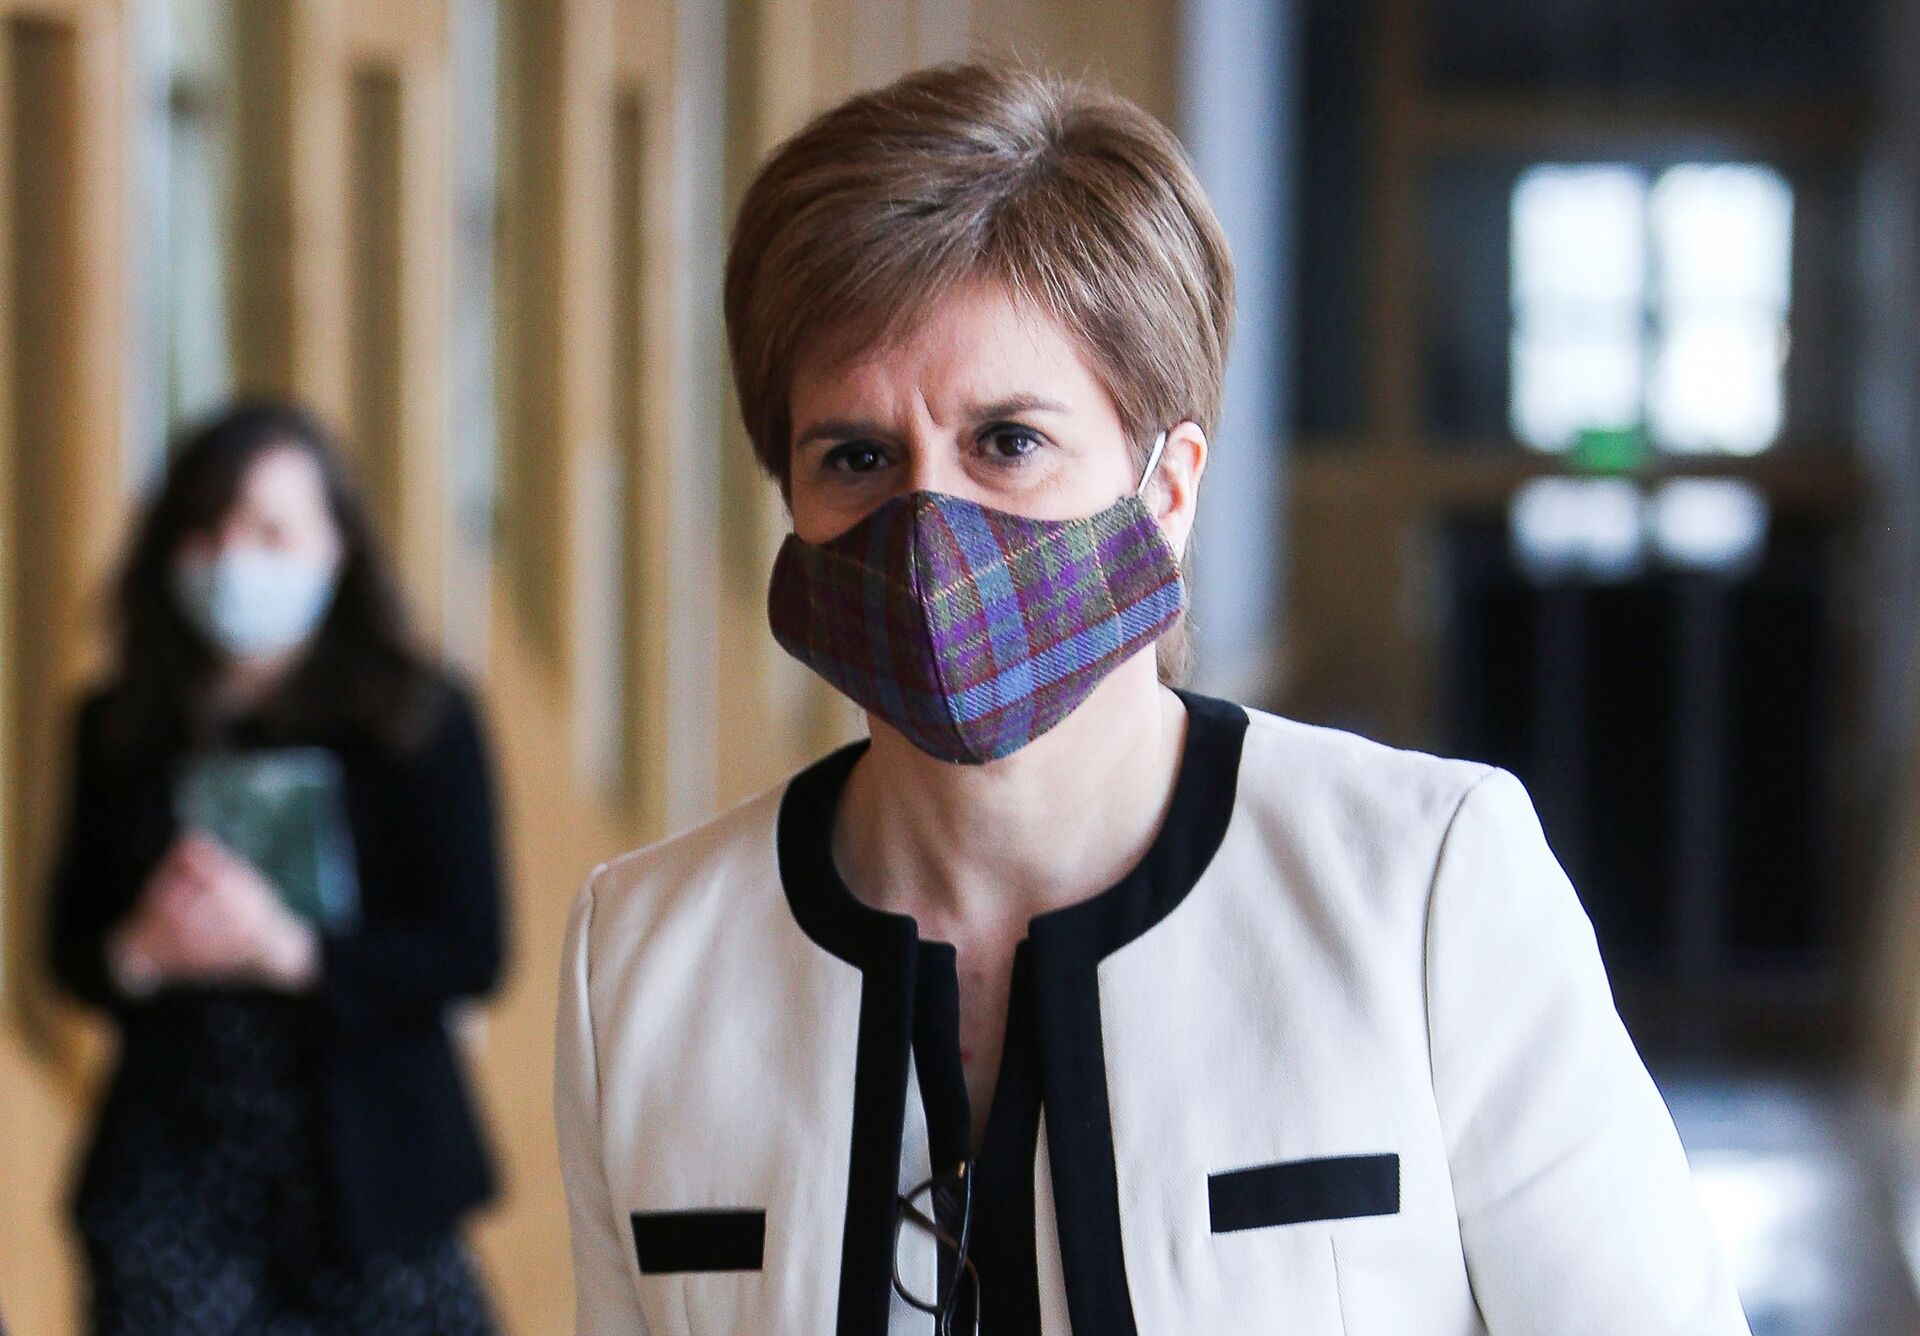 Scottish Conservatives Accuse SNP of Being 'Out of Touch' Over £600,000 Referendum Pot - Sputnik International, 1920, 22.02.2021